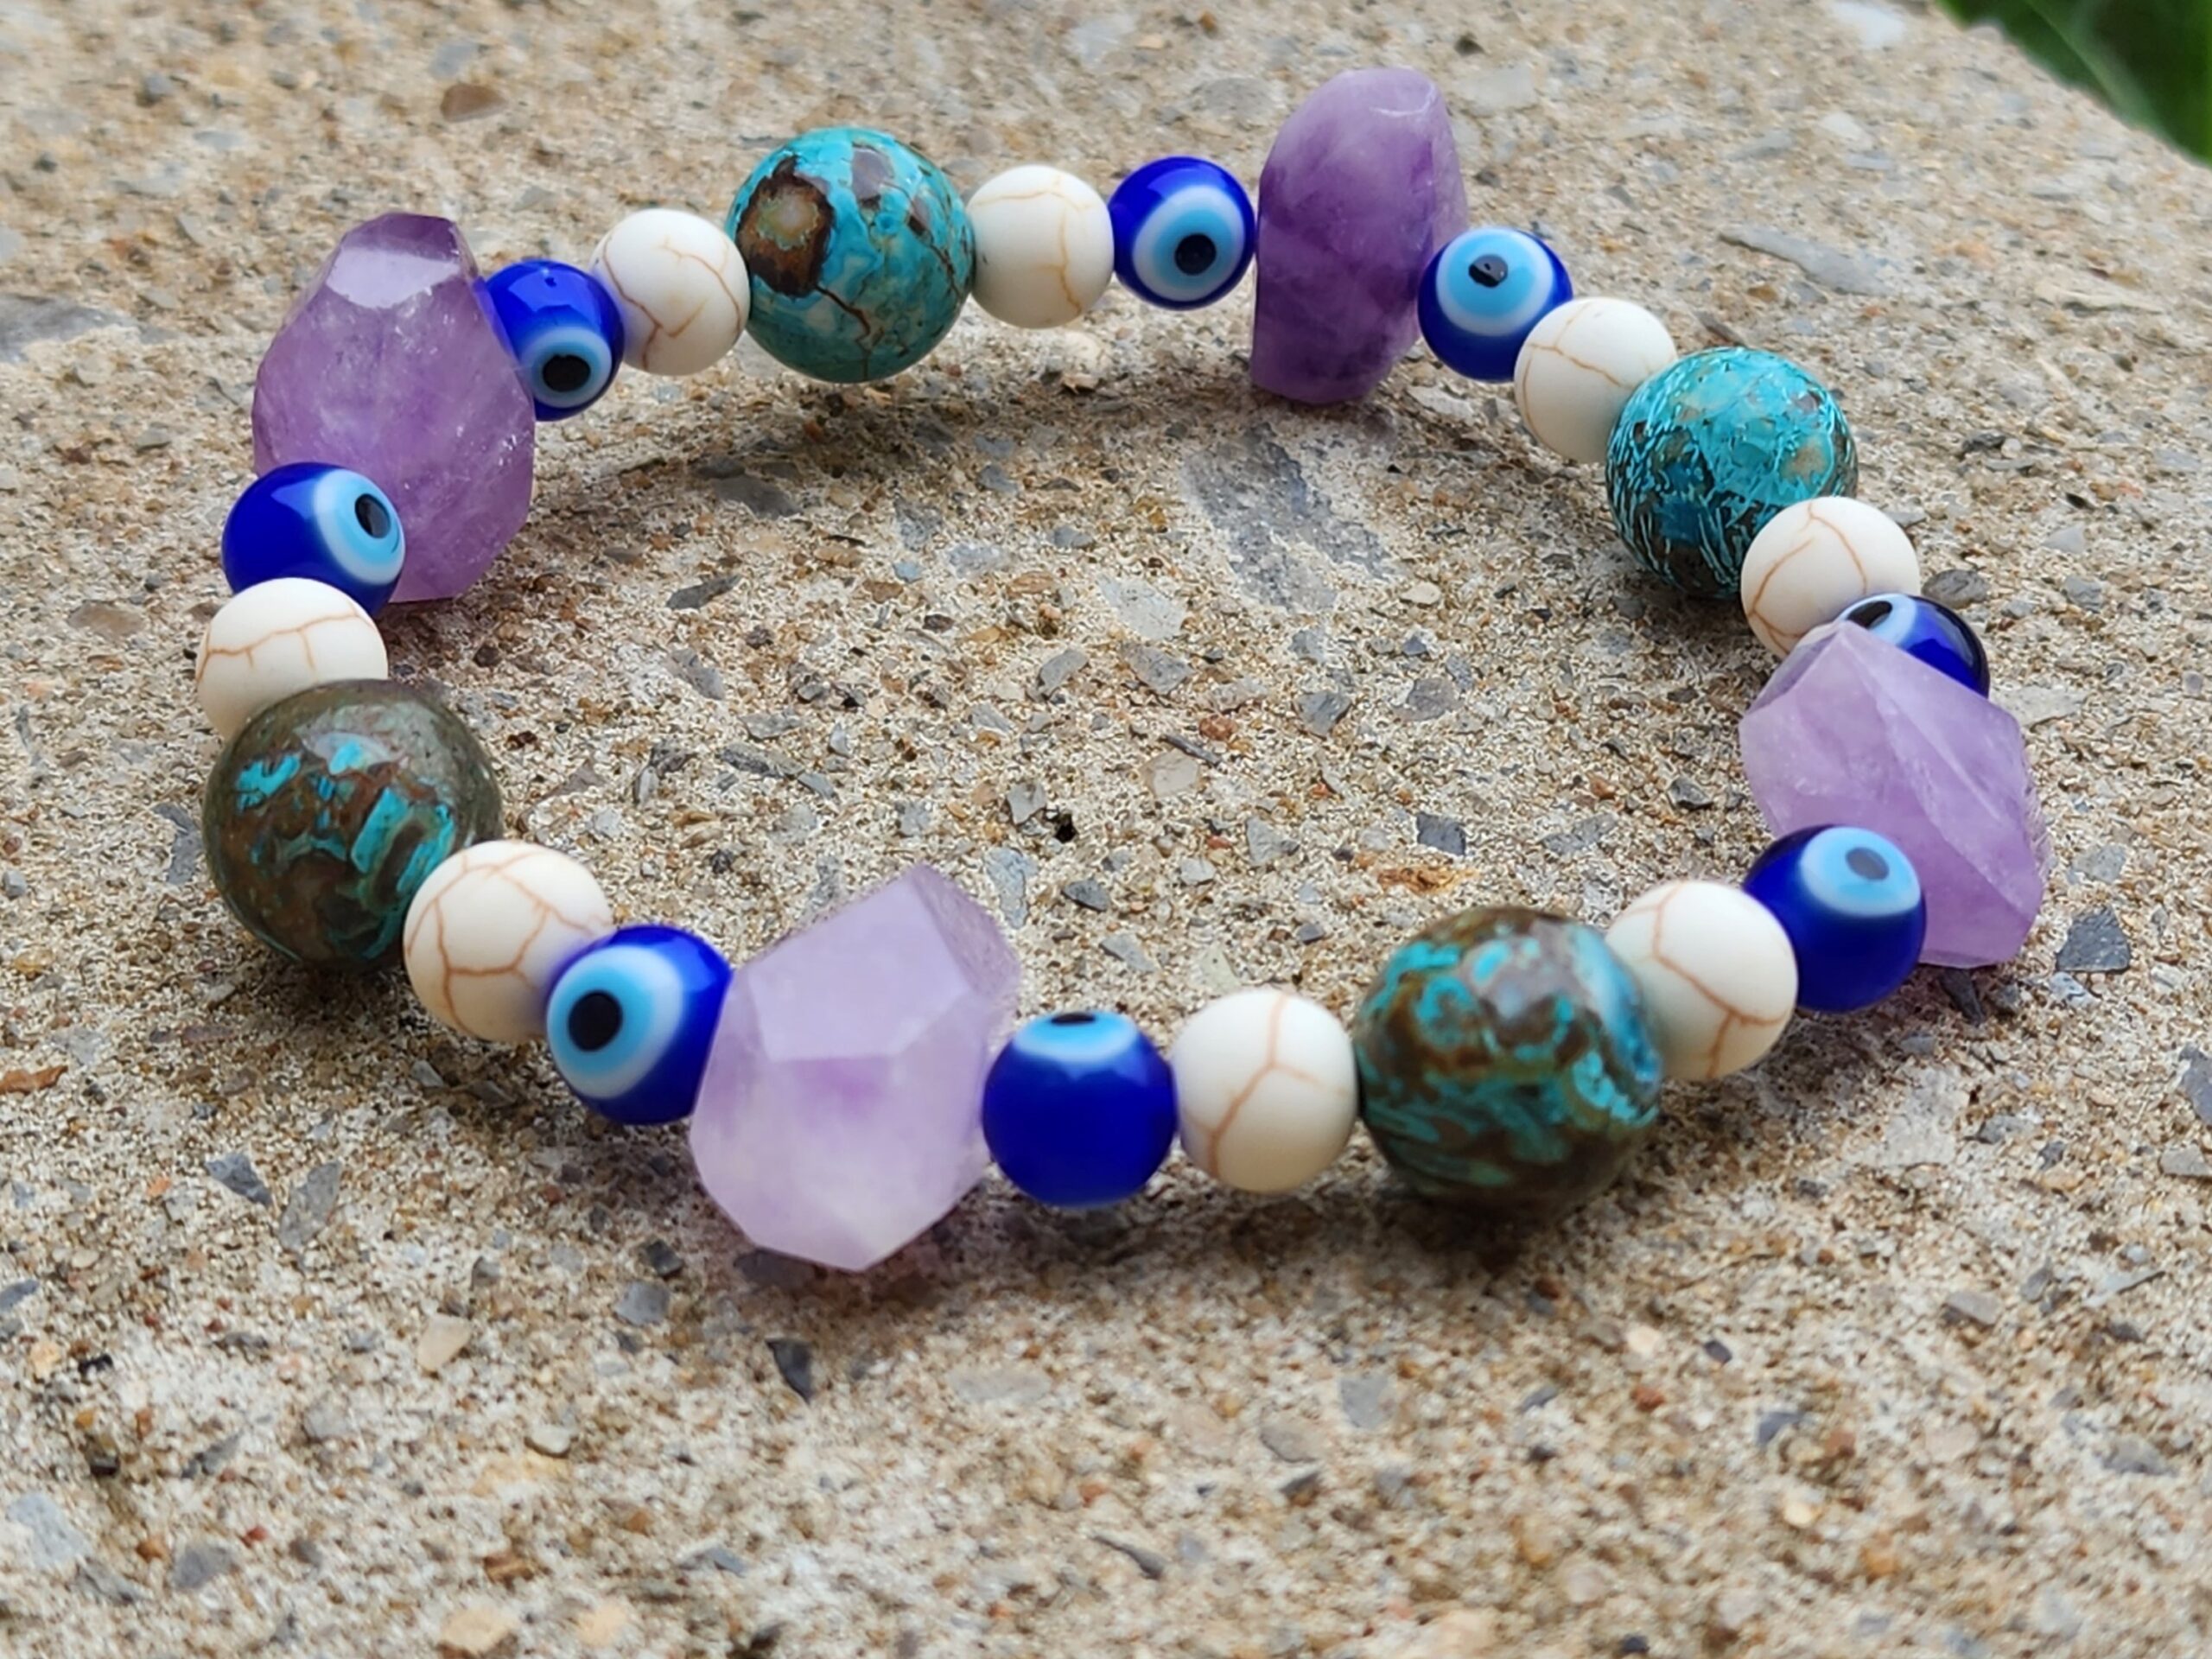 Handcrafted bracelets made with amethyst, turquoise, and evil eye beads.